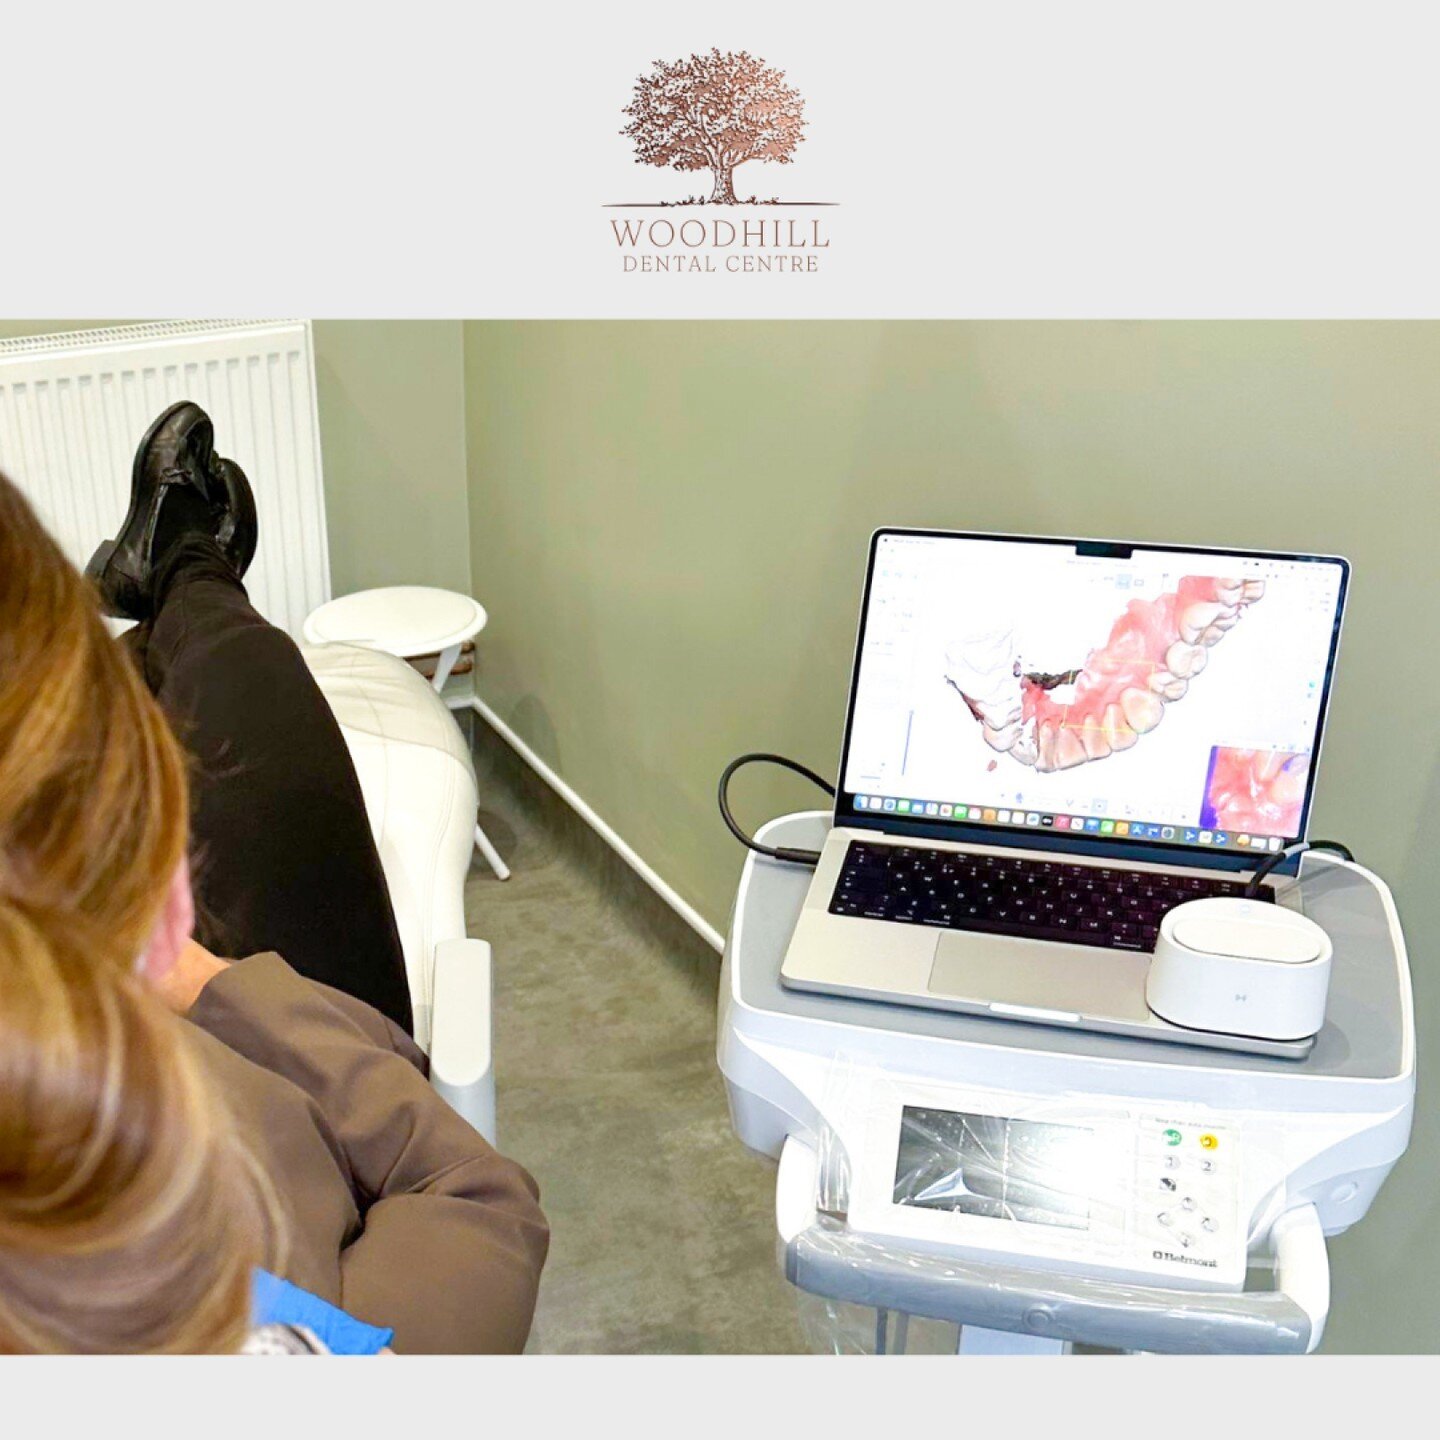 EXCITING ANNOUNCEMENT!! ⭐️

Digital Dentistry is coming to Woodhill soon, revolutionising the way we take impressions for crown and implant preps, as well as study models.

With the use of innovative technology, we're taking the discomfort and inconv